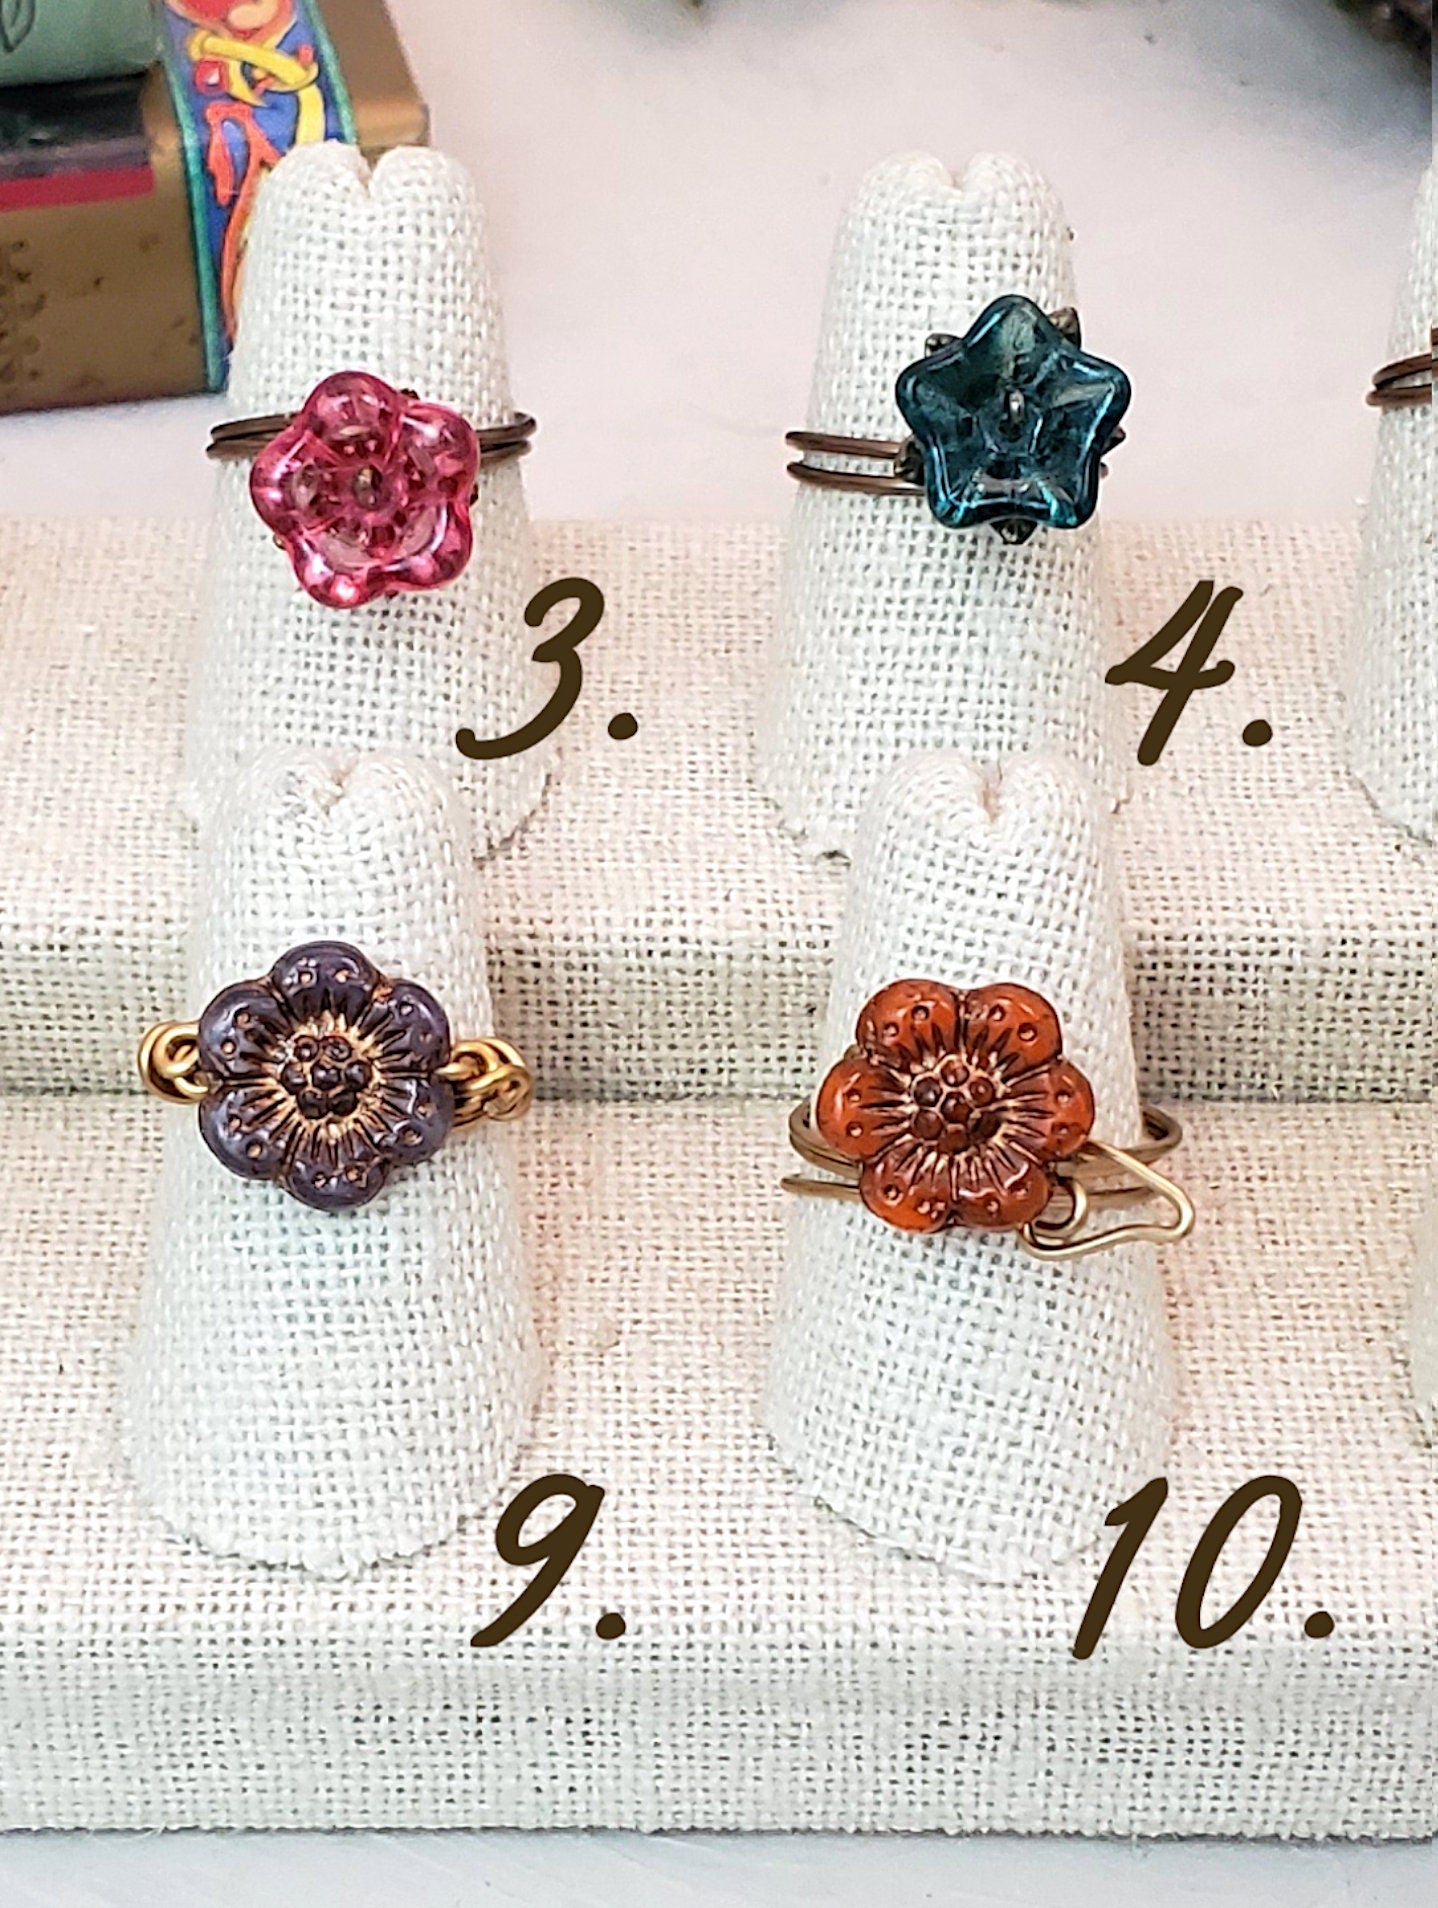 Flower Ring, Simple, Boho, Bohemian, Fairy Tale, Renaissance, Medieval, Garden, Wedding, Bridesmaid, Choice of Flowers and Metals, Lot A